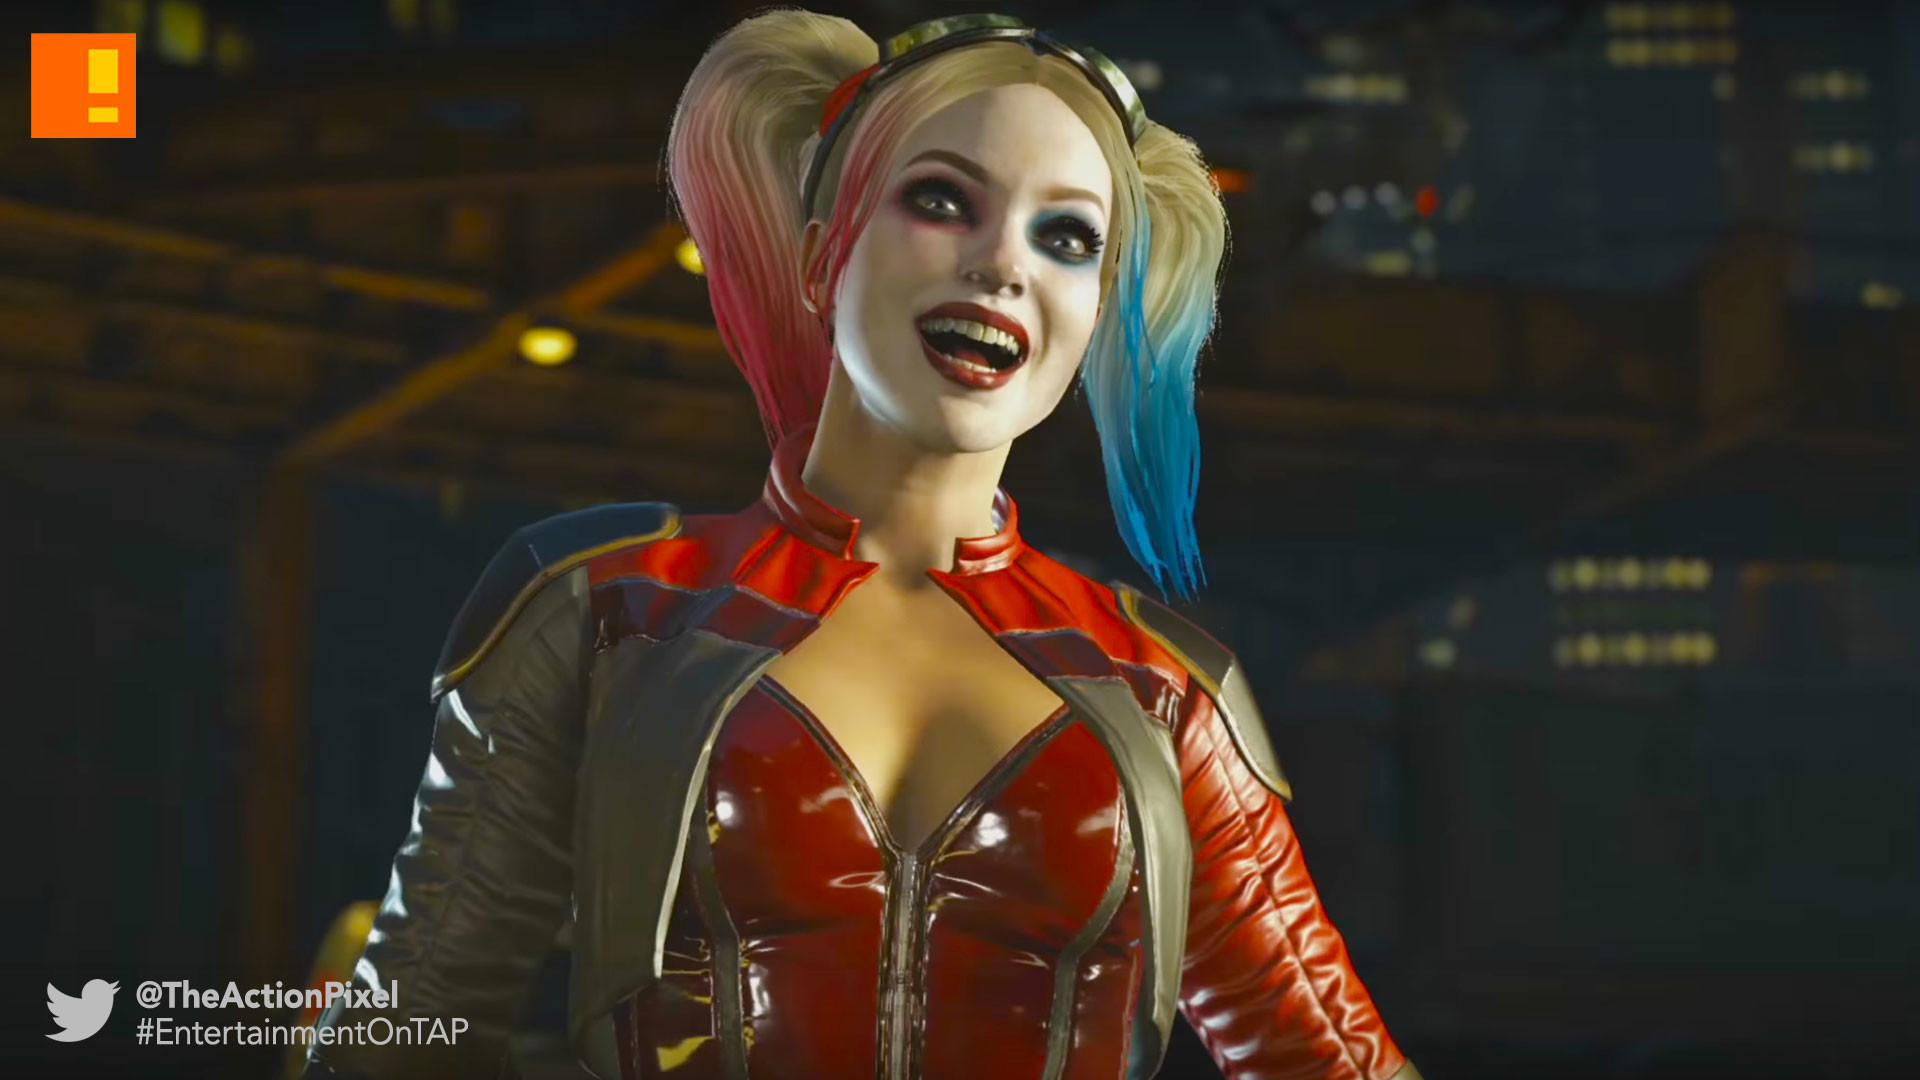 1920x1080 harley quinn , Injustice 2, deadshot, Injustice 2, the action pixel,  entertainment